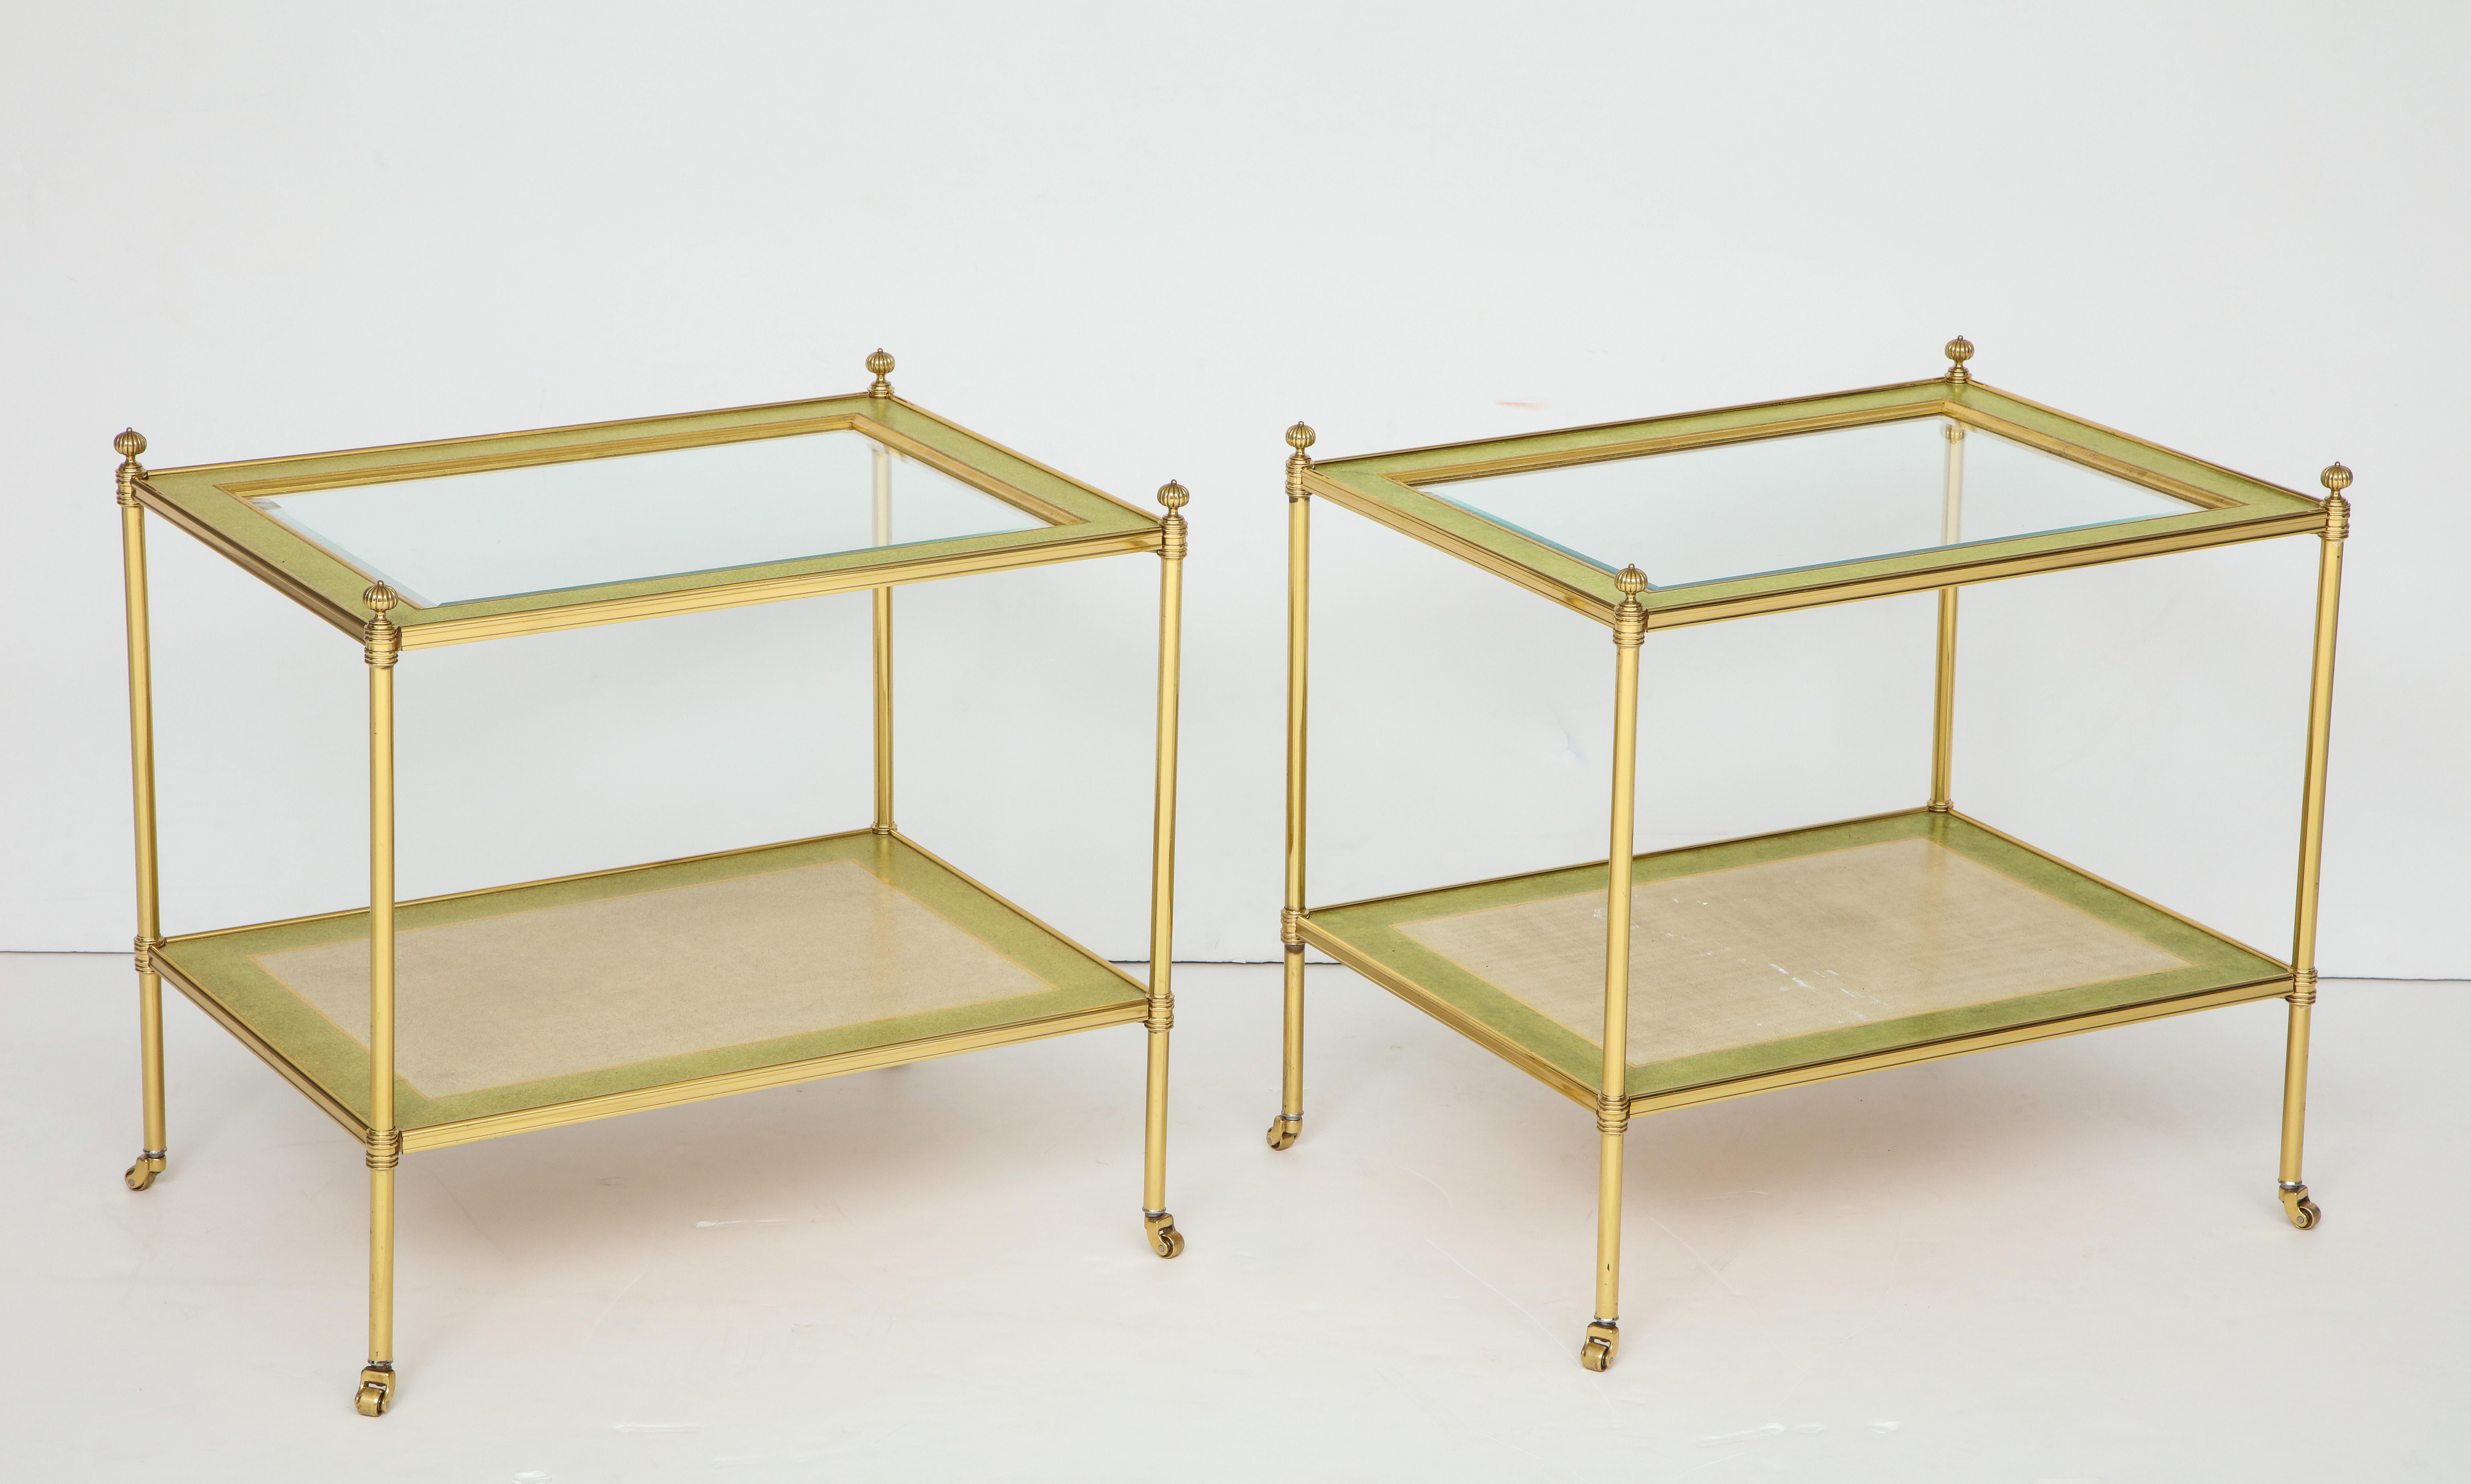 Each with four brass rods, topped with a molded finial and resting on brass rollers, all supporting two shelves: each with a faux painted brass frame and inset with glass.